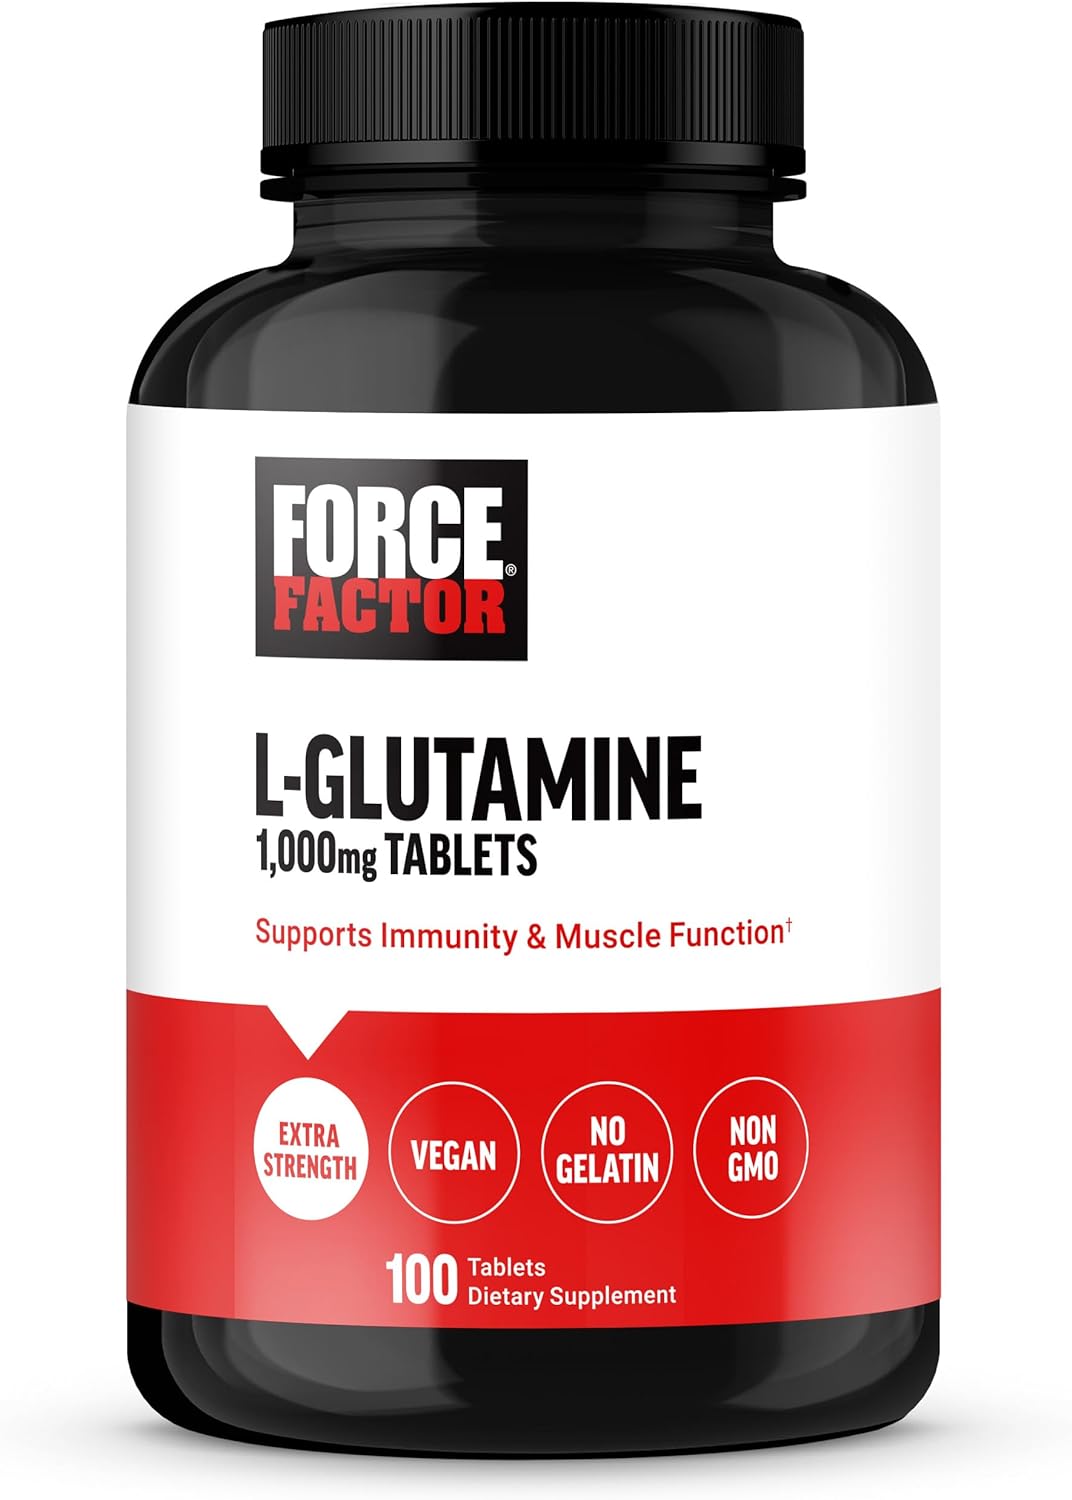 FORCE FACTOR L-Glutamine 1000mg Tablets, Glutamine for Muscle Recovery, Healthy Muscle Function, and Immunity, Vegan, Non-GMO, 100 Tablets